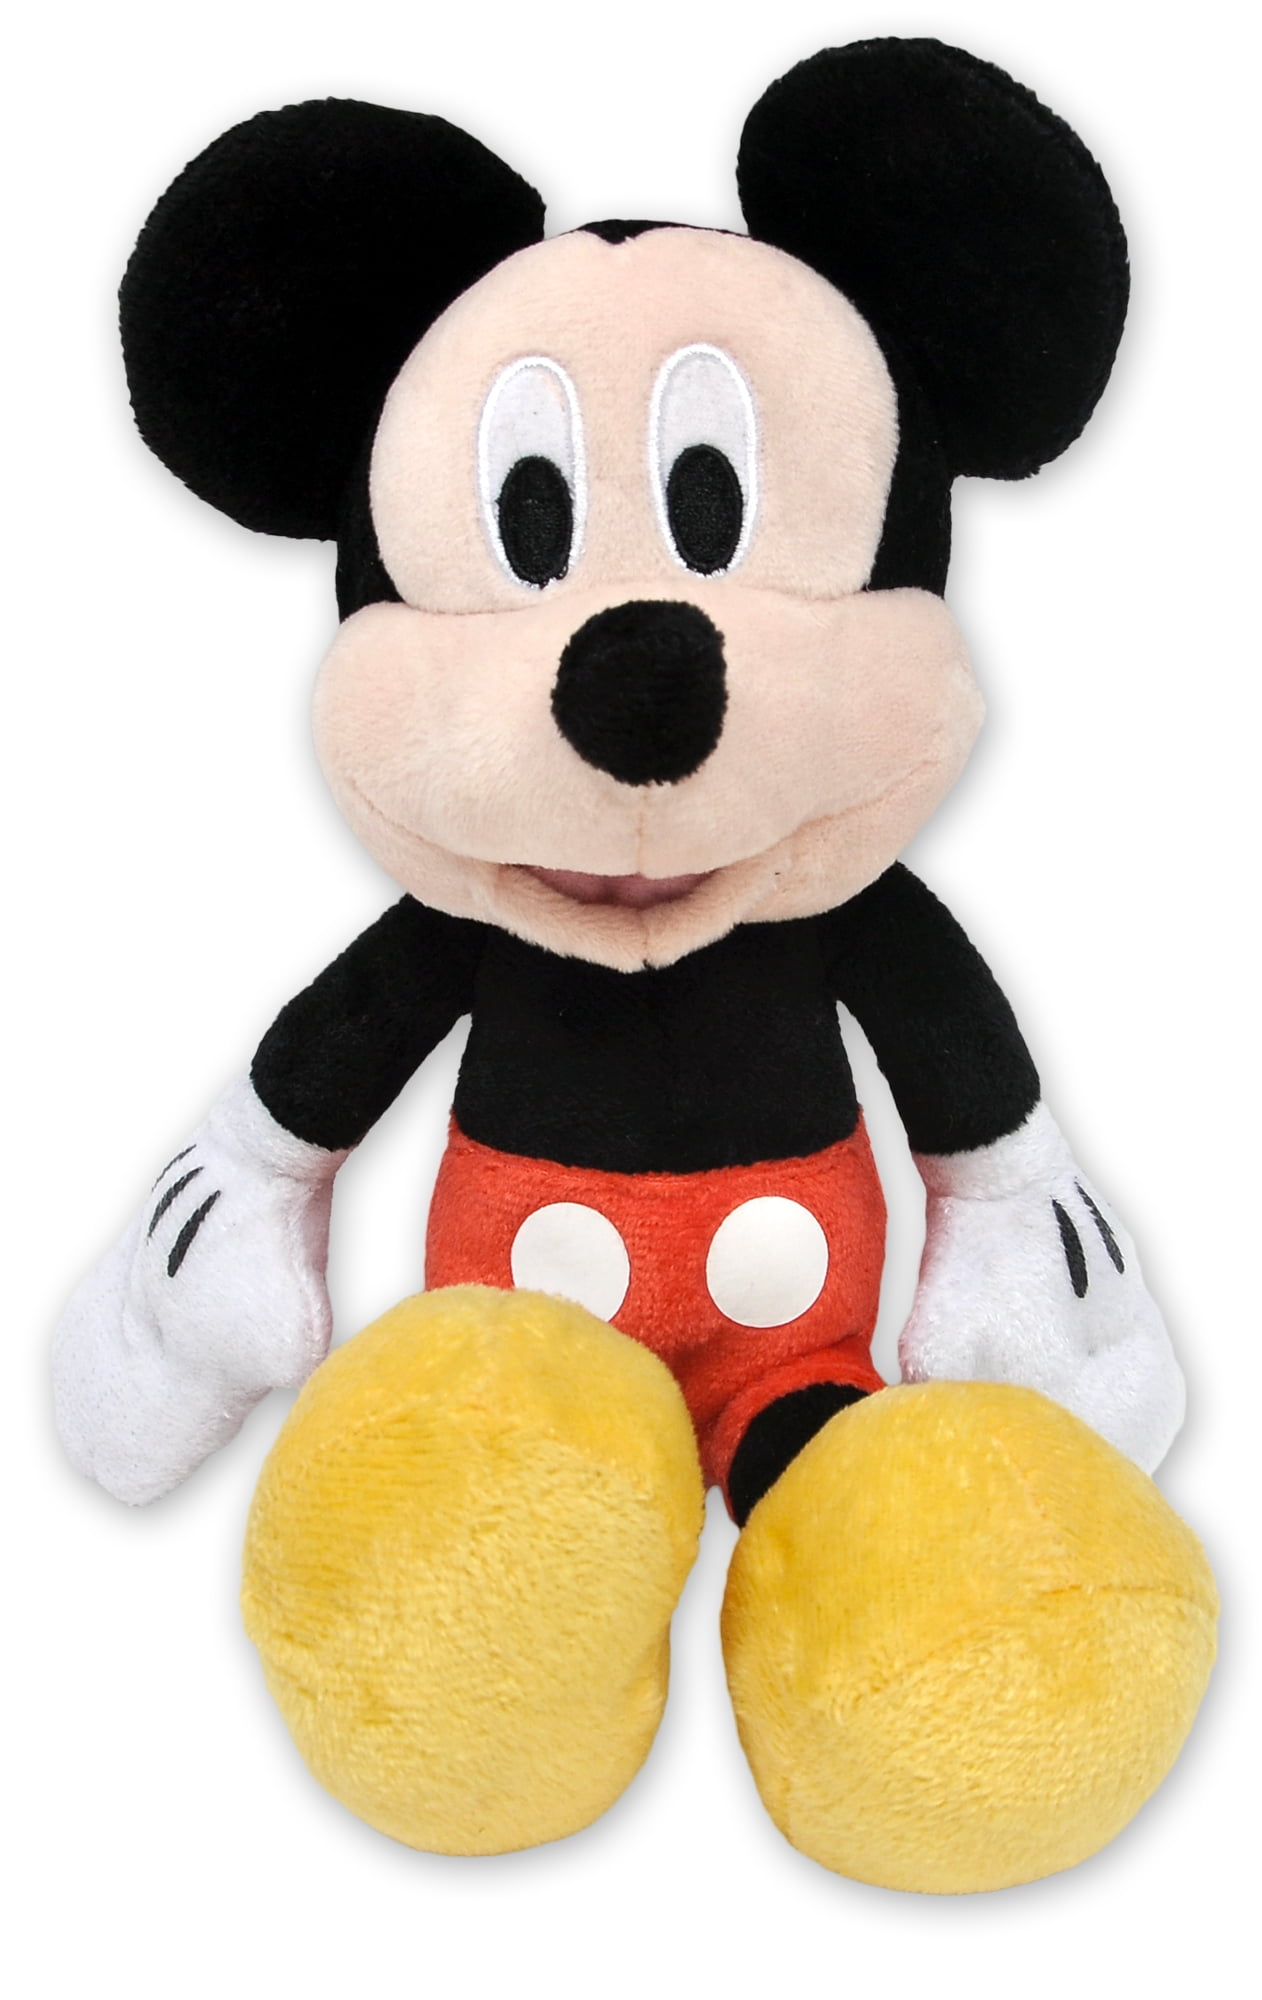 Disney Mickey Mouse Clubhouse 11 inch Stuffed Plush Doll for sale online 